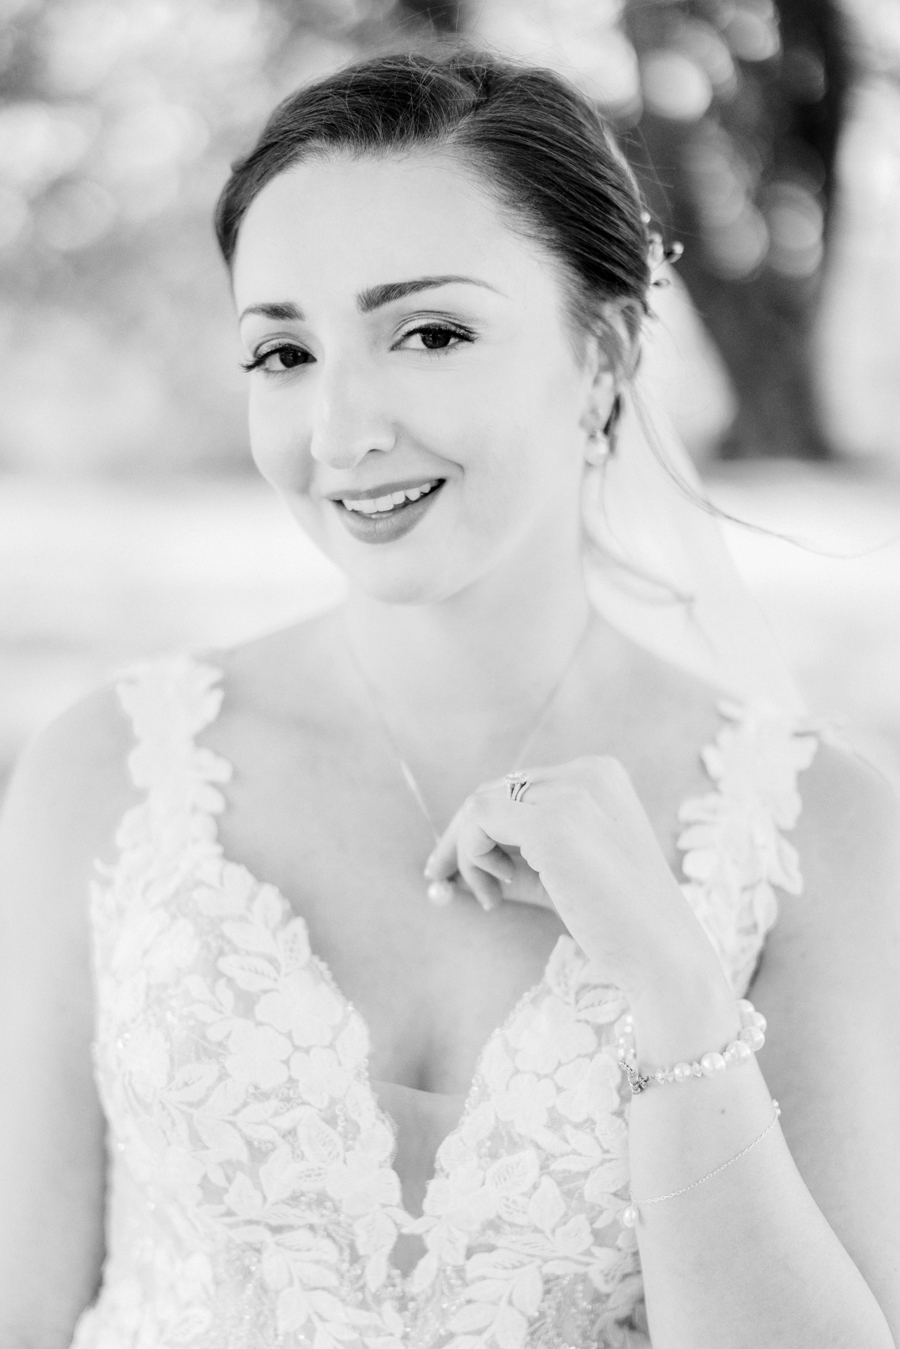 A bride poses for portraits at her Blue Bell Farm wedding by Missouri wedding photographer Love Tree Studios.